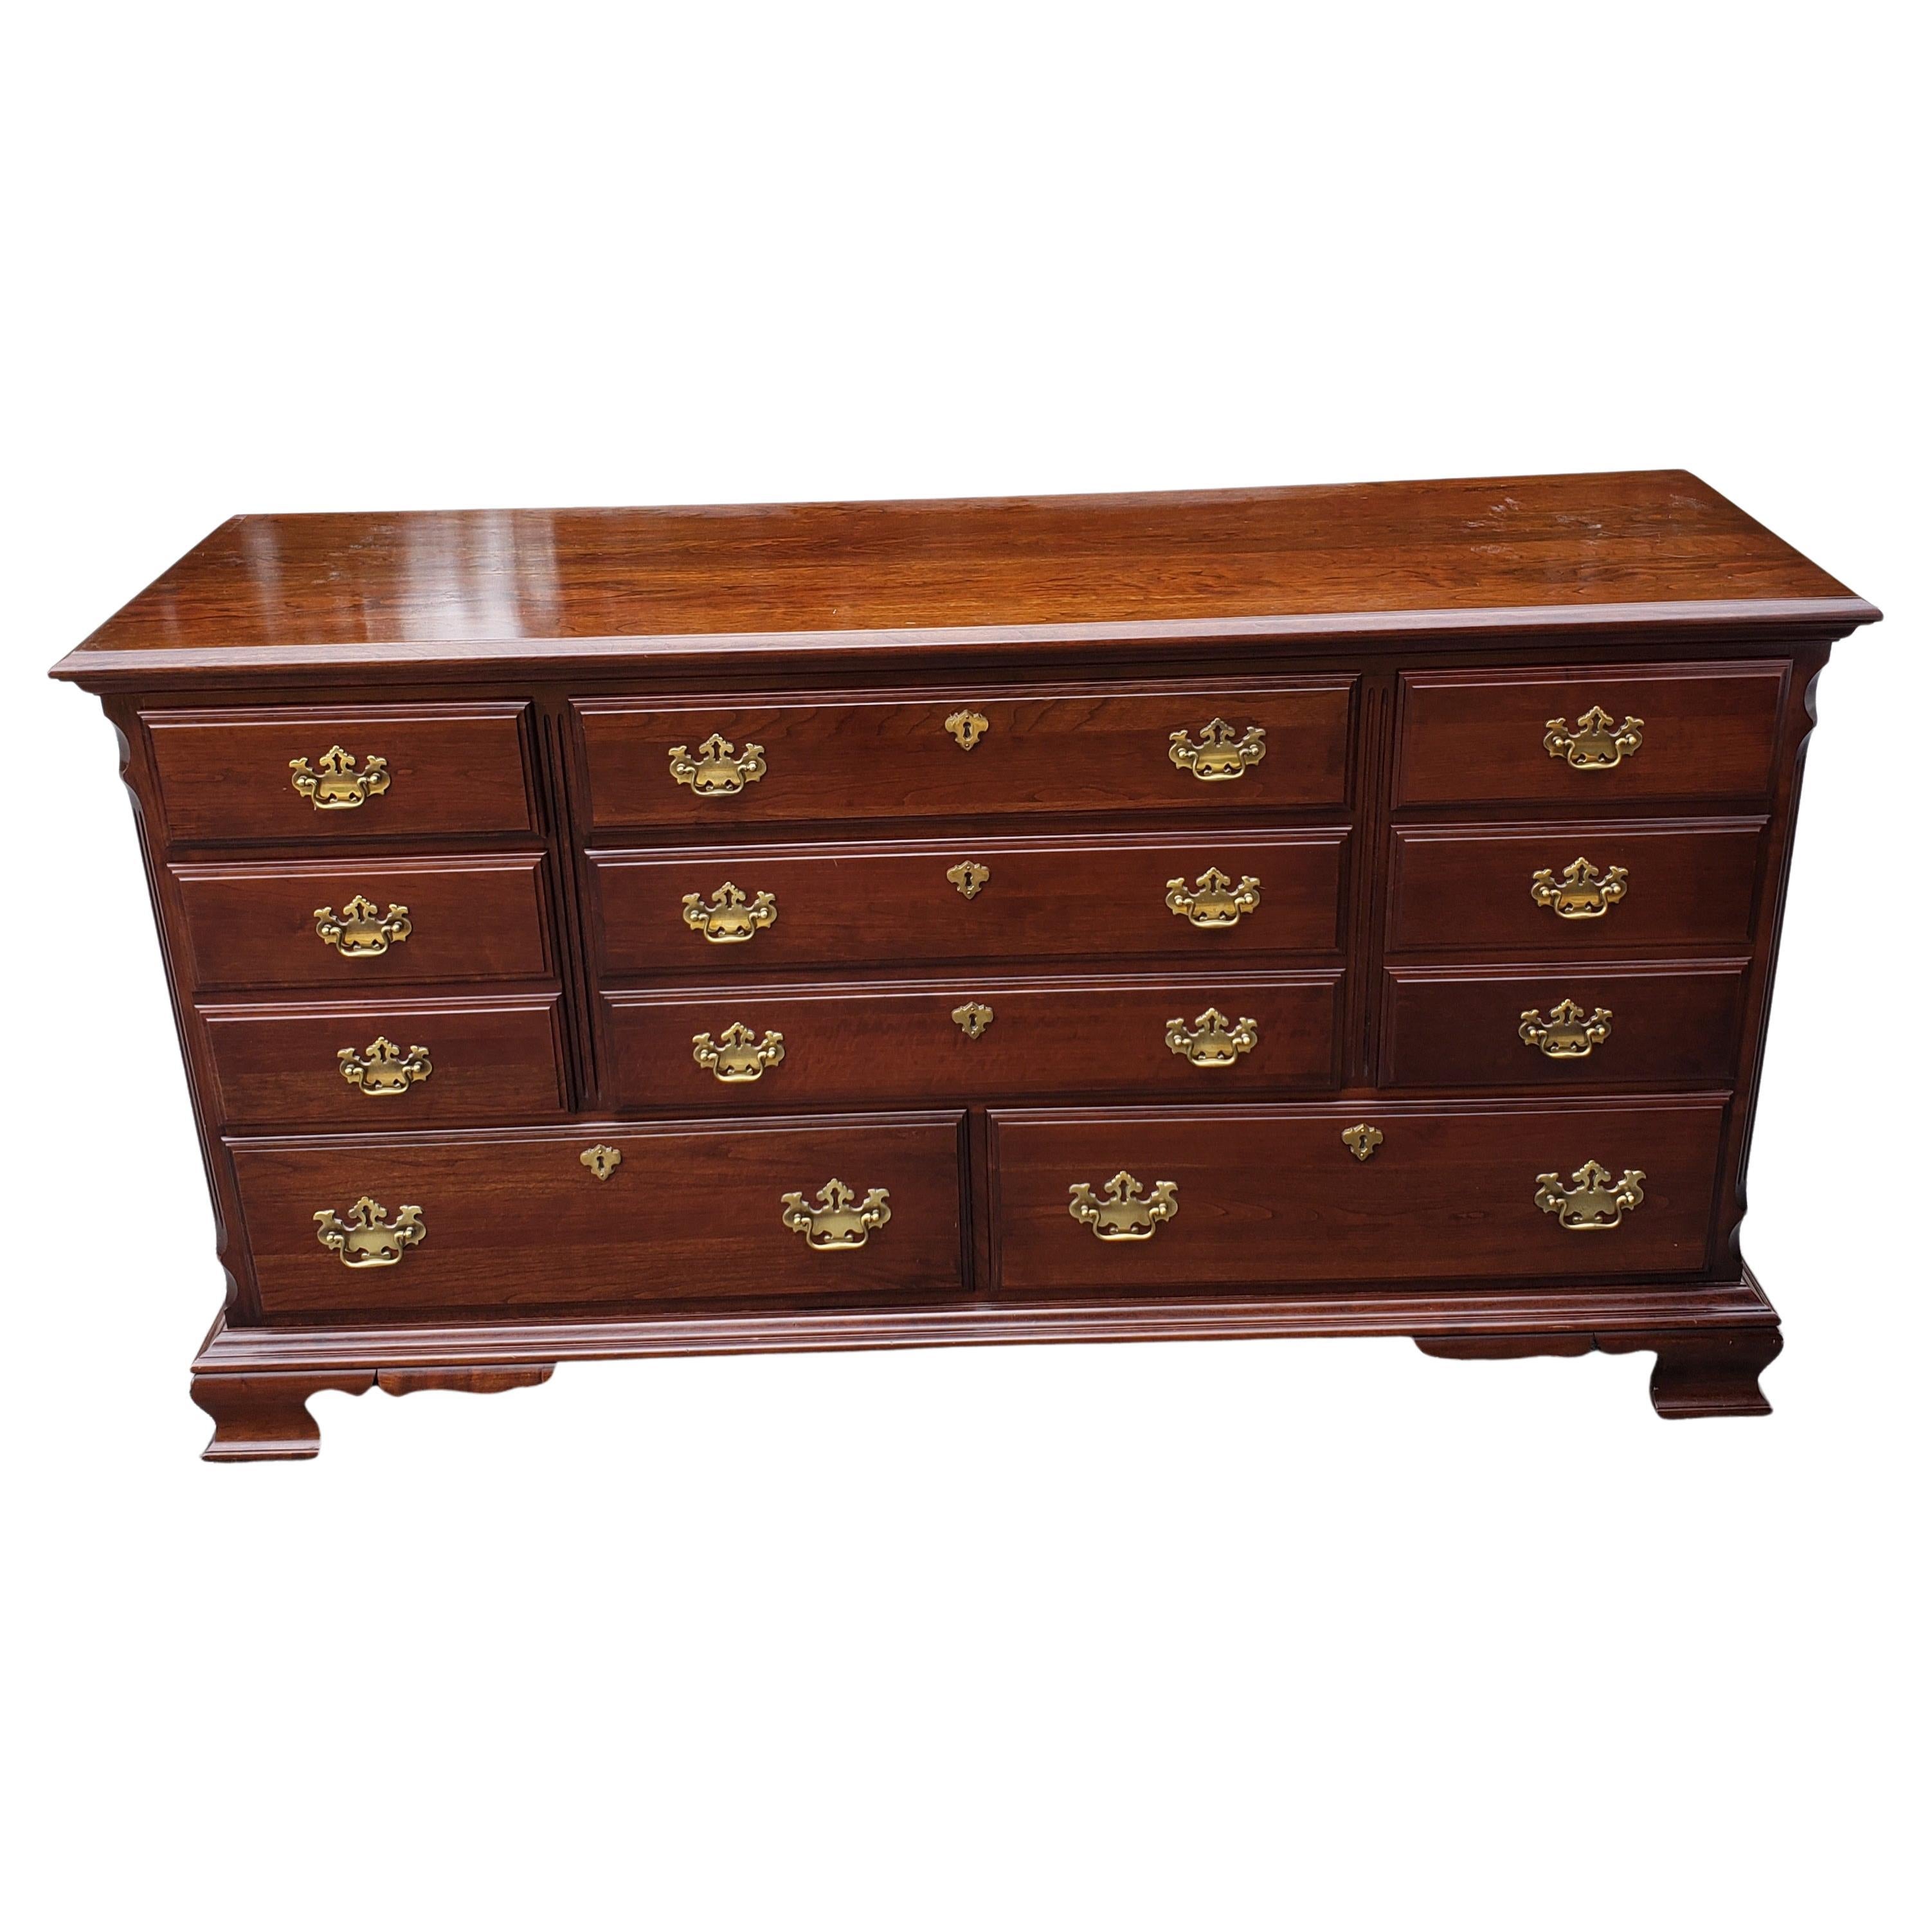 Pennsylvania House Chippendale cherry dresser with mirror in very good vintage condition.
All dovetail drawers close and open very smoothly. Measures 62.5